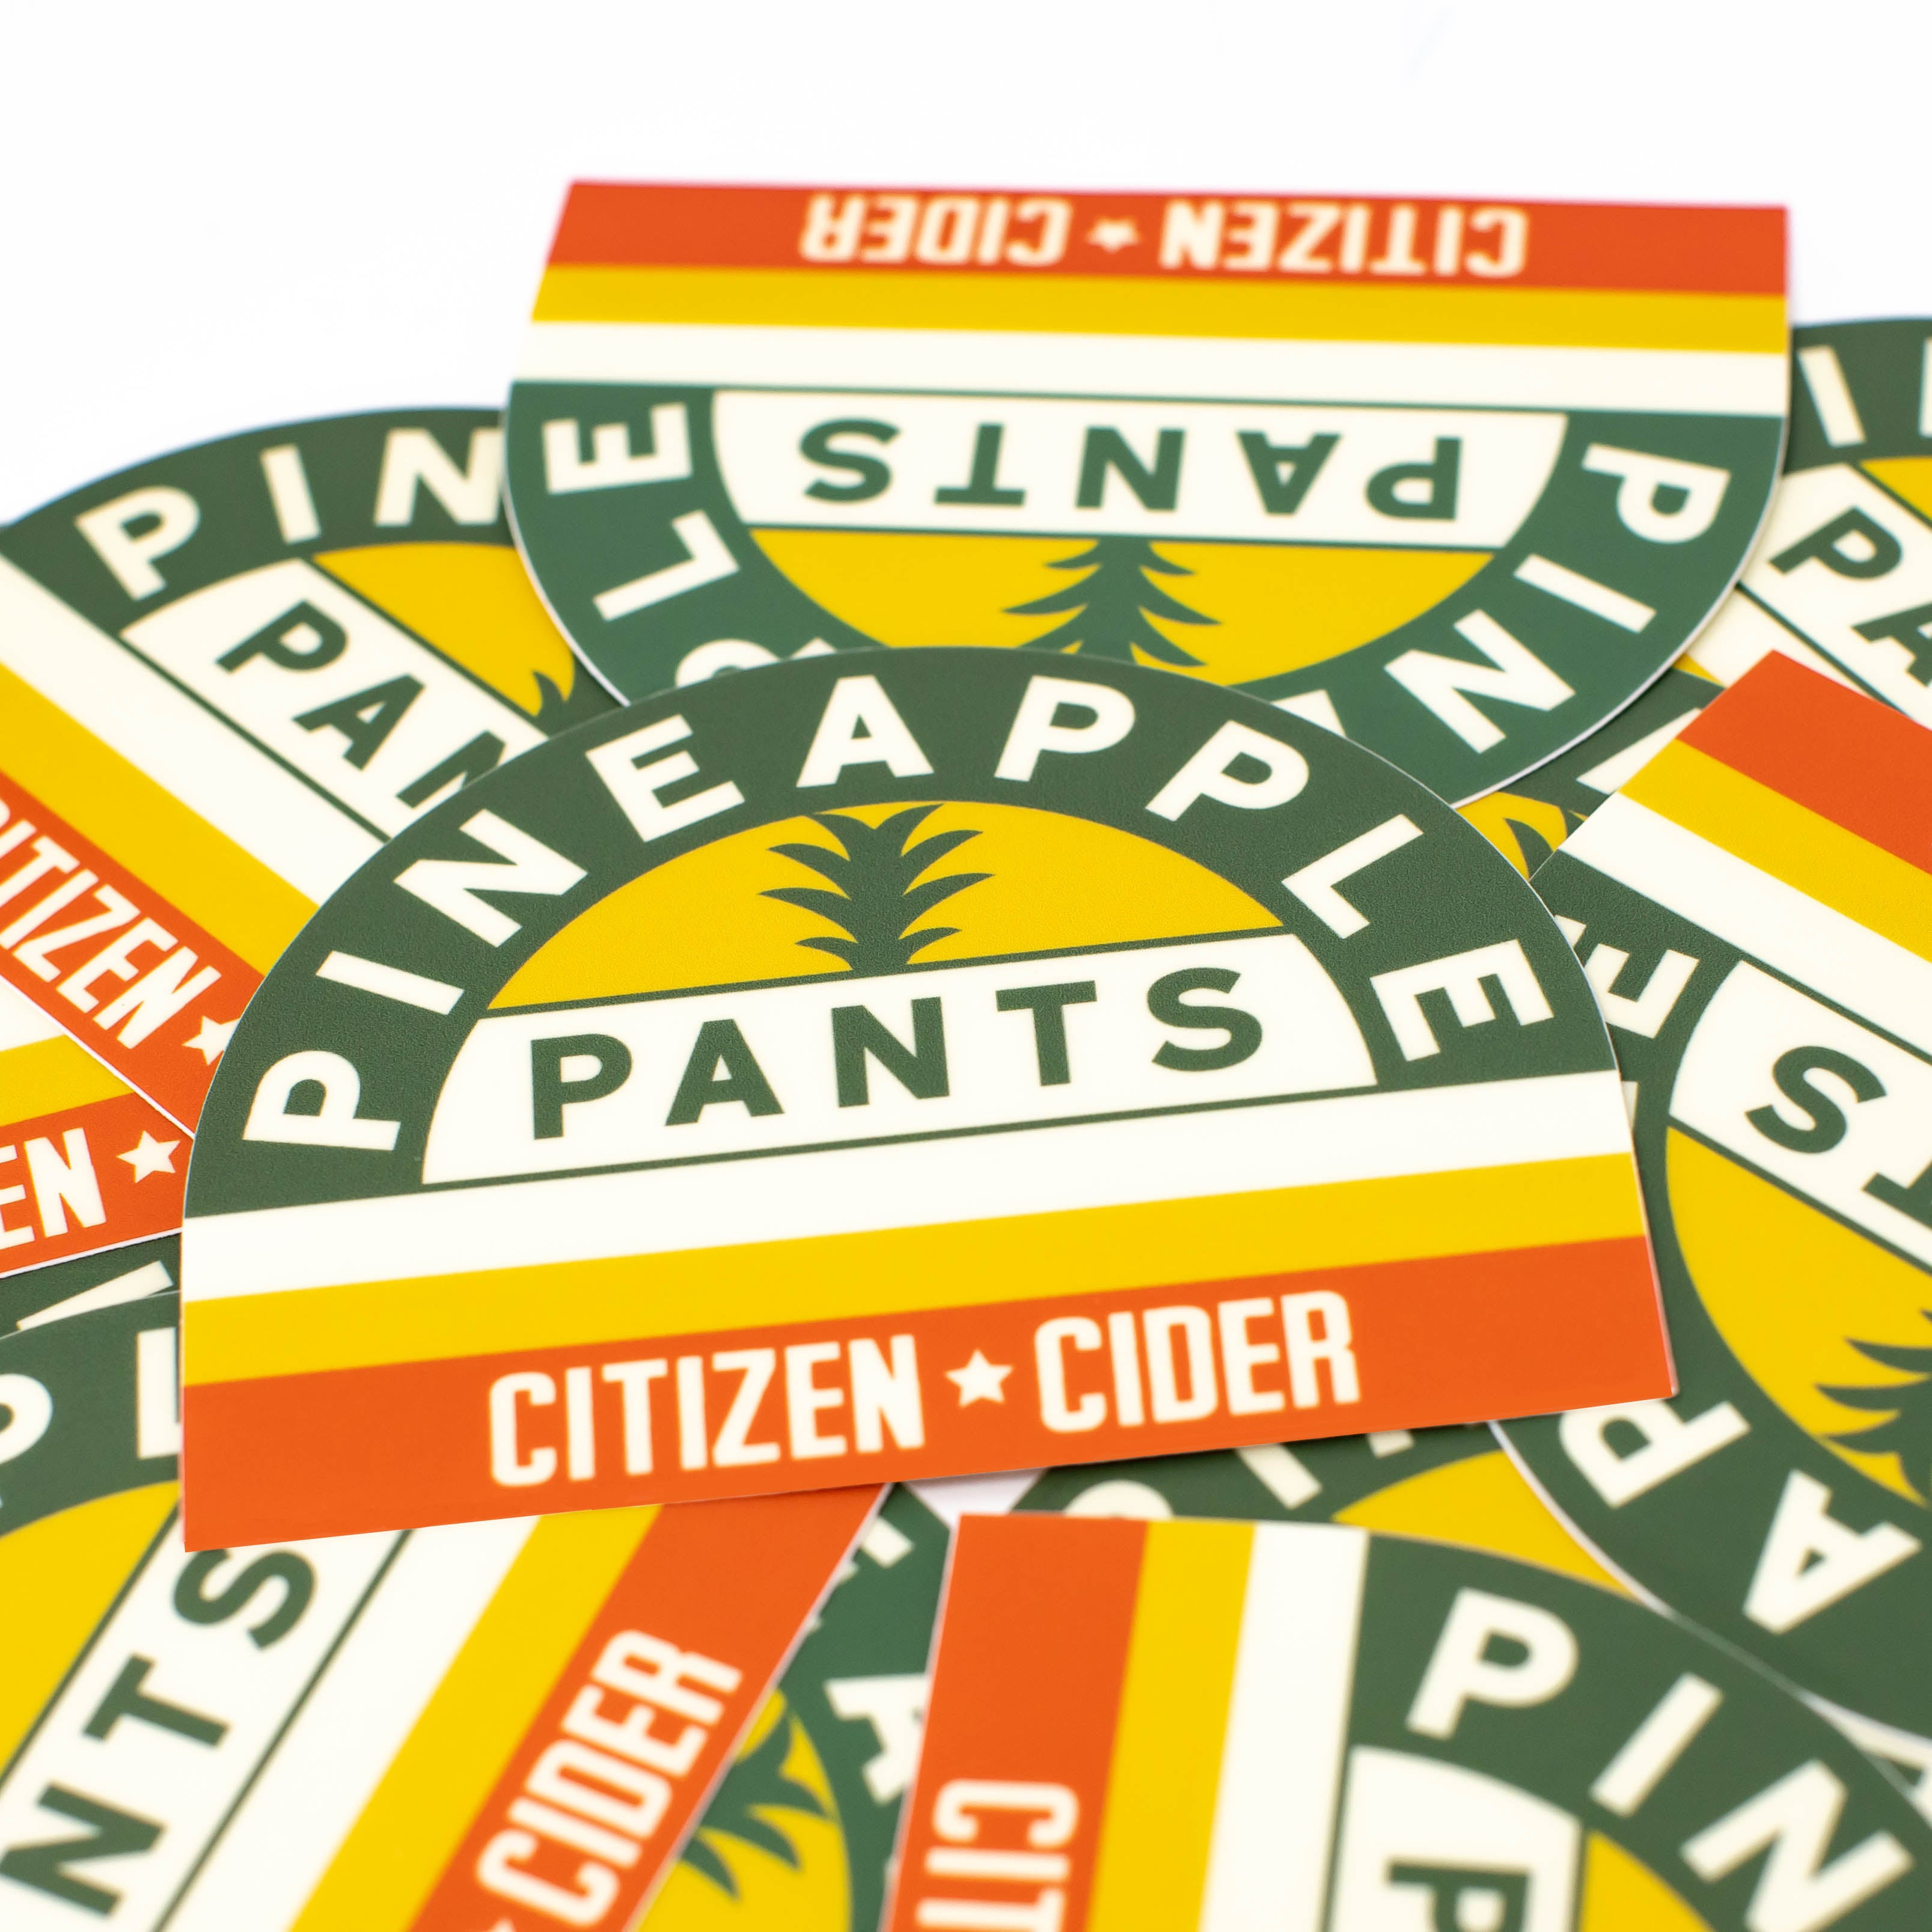 Pineapple Pants Citizen Cider brewery stickers